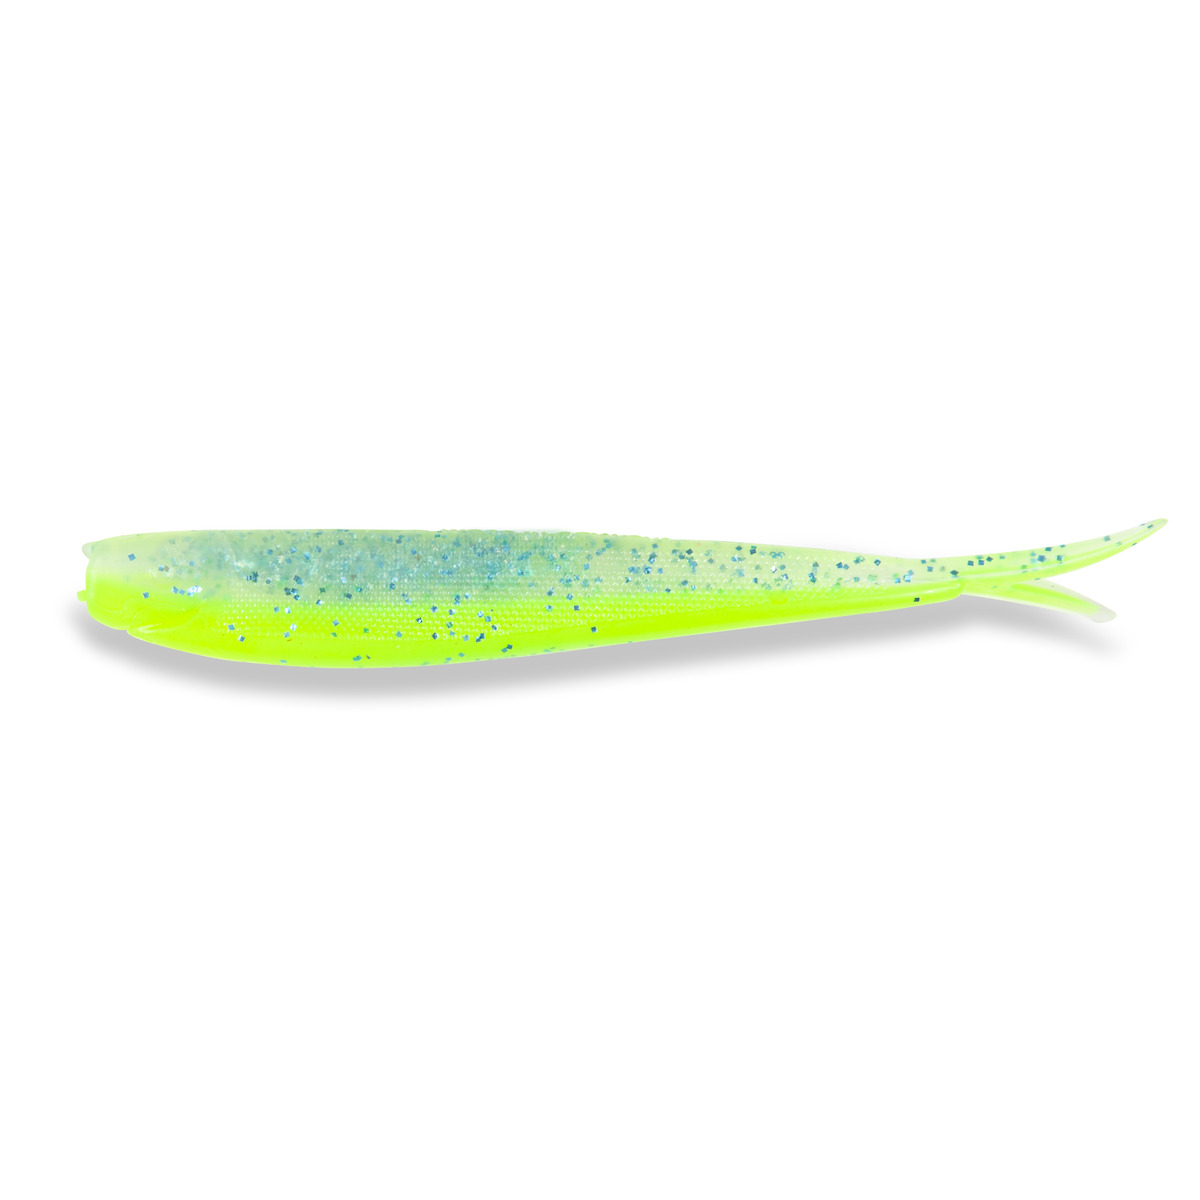 Iron Claw Moby V-tail 2.0 - MM UV